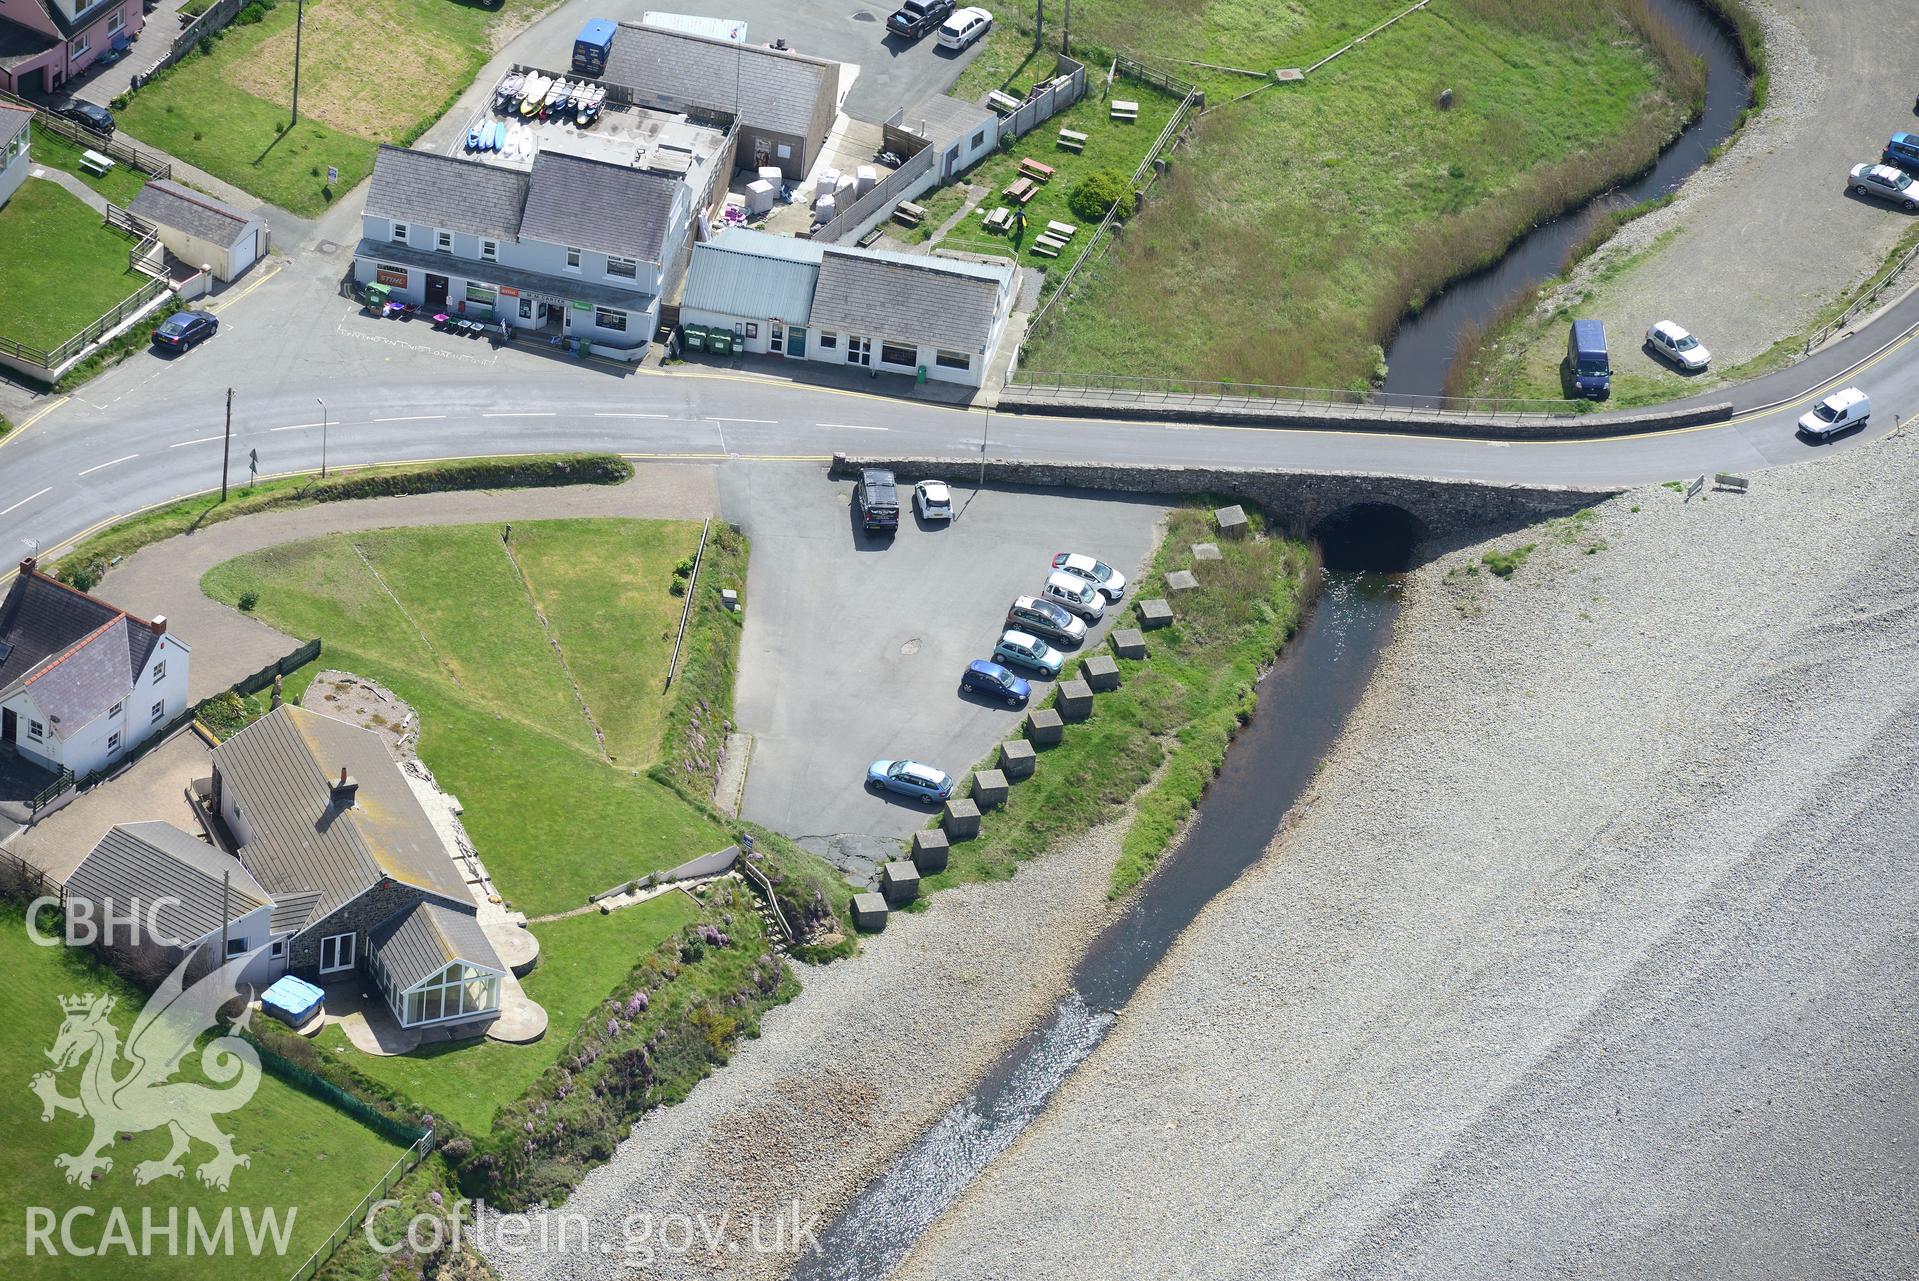 Newgale Anti Invasion defences (cubes), Newgale, near Haverfordwest, Pembrokeshire. Oblique aerial photograph taken during the Royal Commission's programme of archaeological aerial reconnaissance by Toby Driver on 13th May 2015.